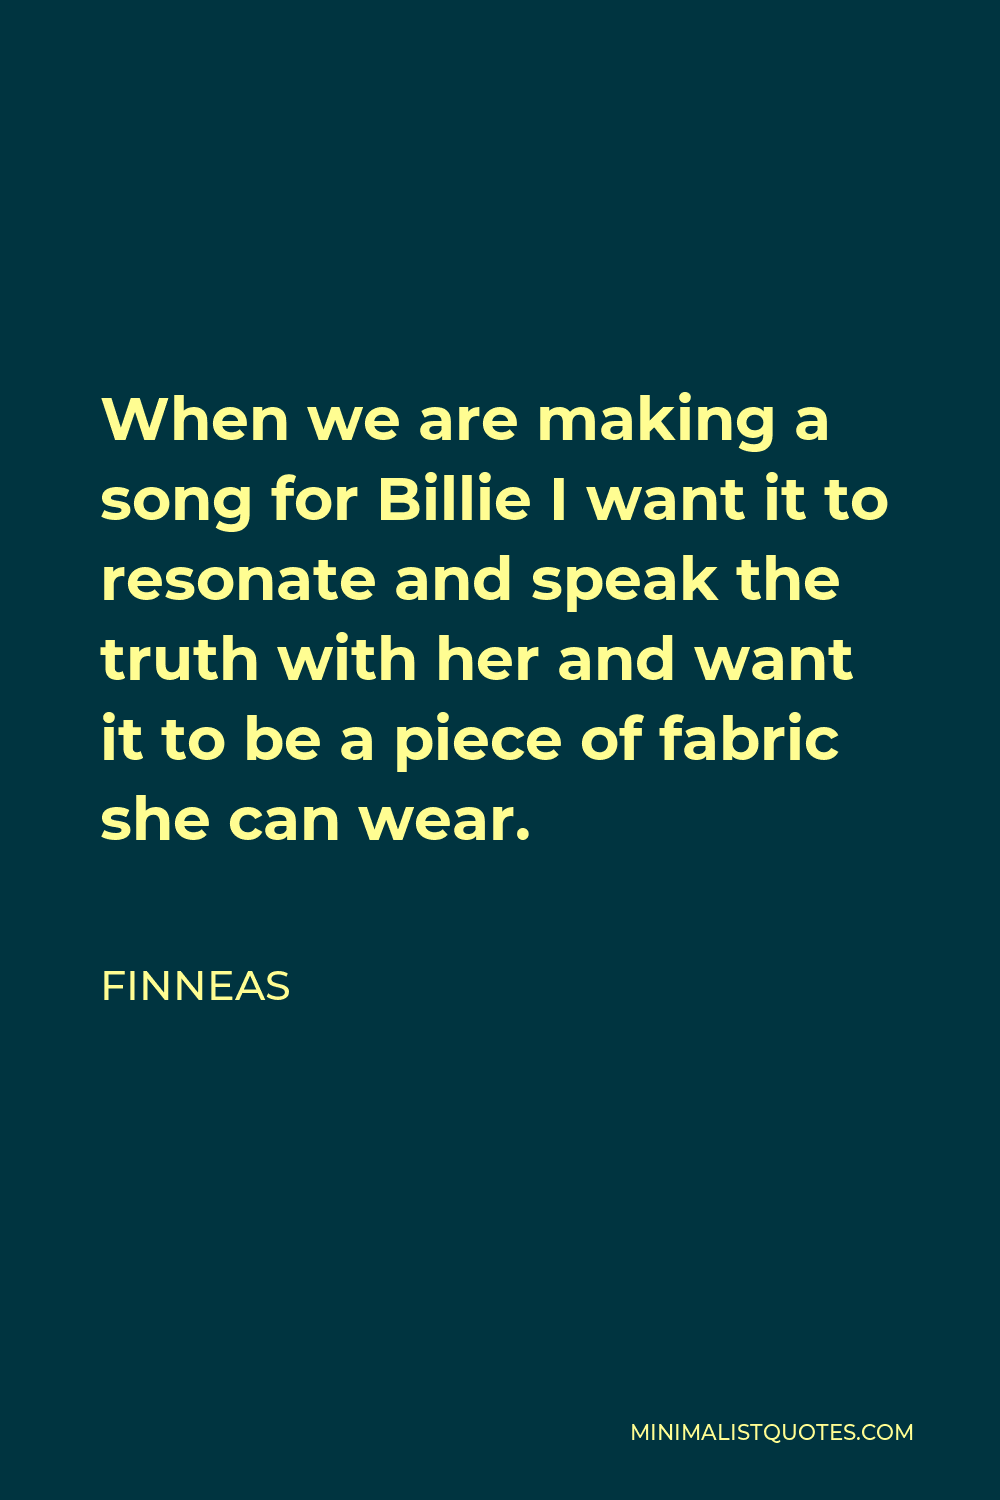 Finneas Quote - When we are making a song for Billie I want it to resonate and speak the truth with her and want it to be a piece of fabric she can wear.